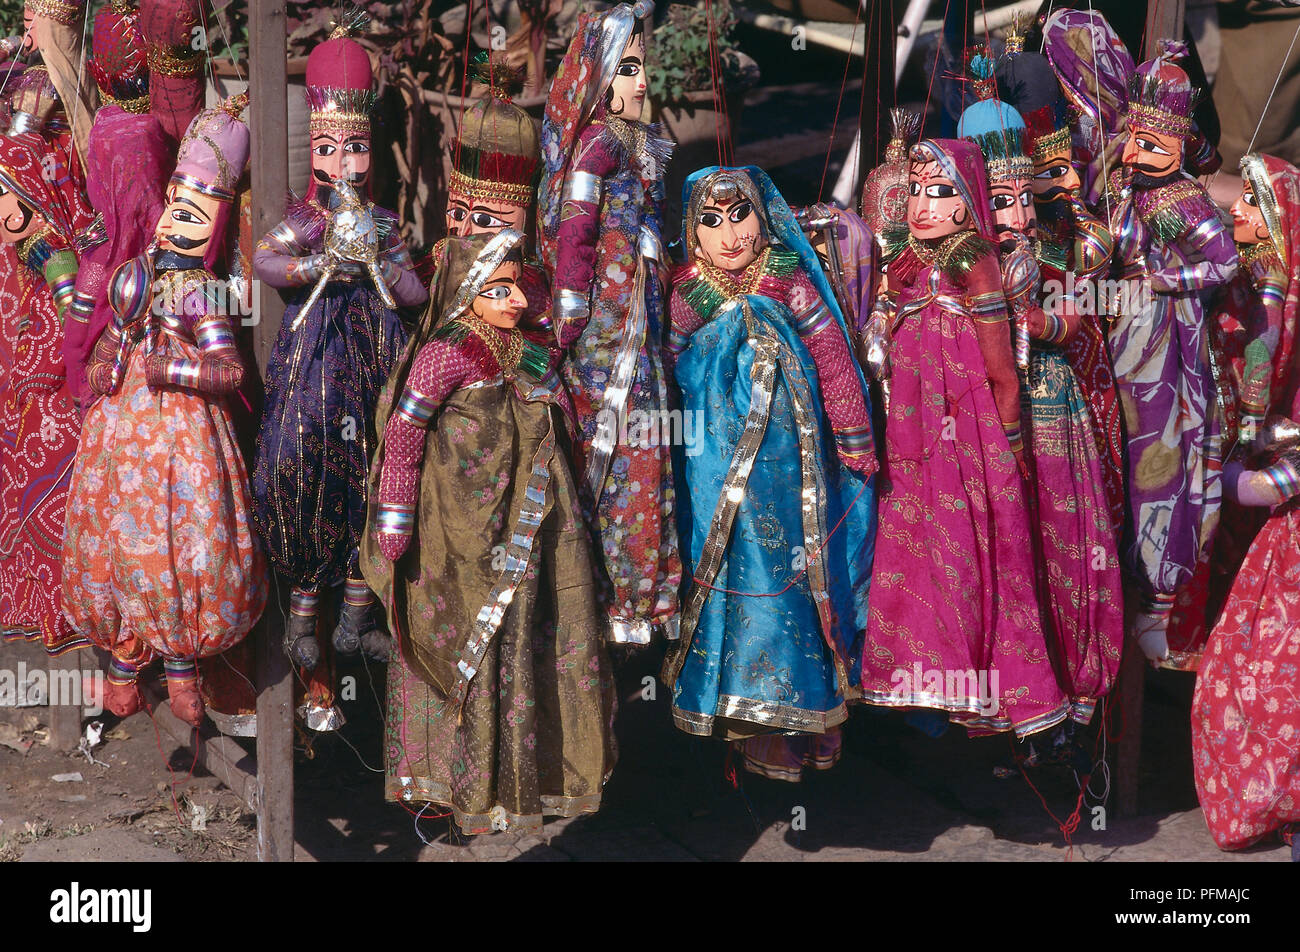 India, Sireh Deori Bazaar, brightly coloured puppets for sale, wearing brightly coloured traditional Indian dress, female puppets wearing vivid saris, male puppets with large black moustache, hanging by red string. Stock Photo